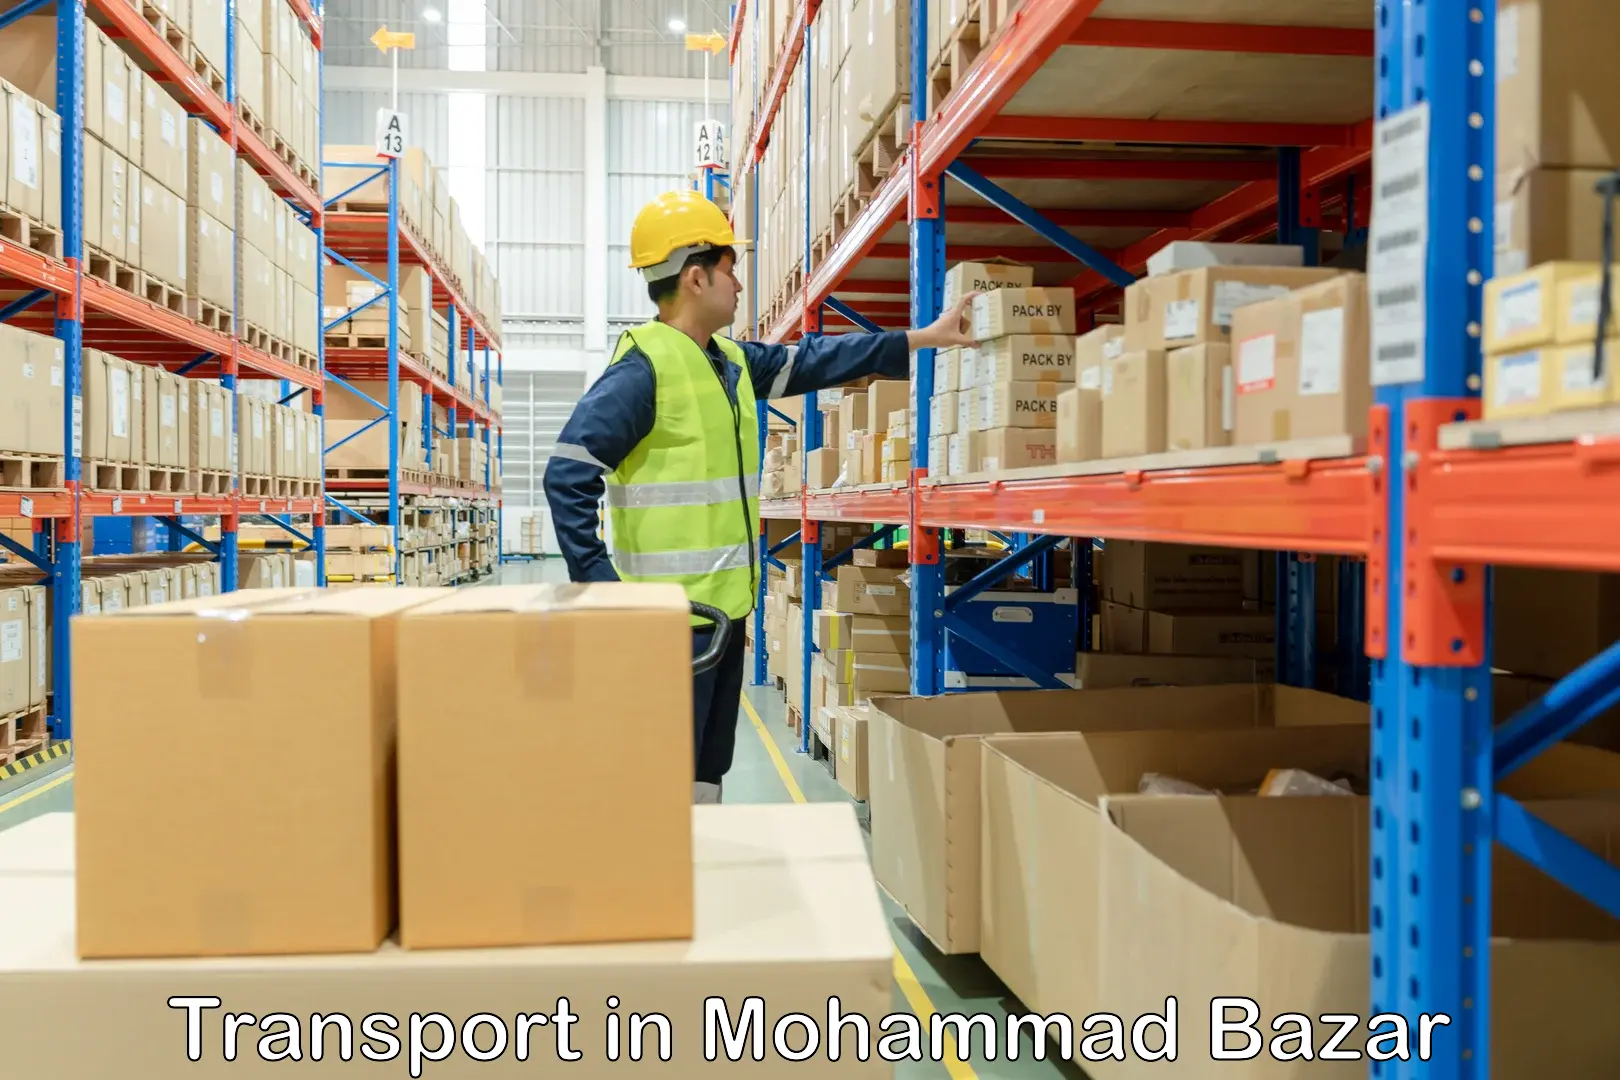 Express transport services in Mohammad Bazar